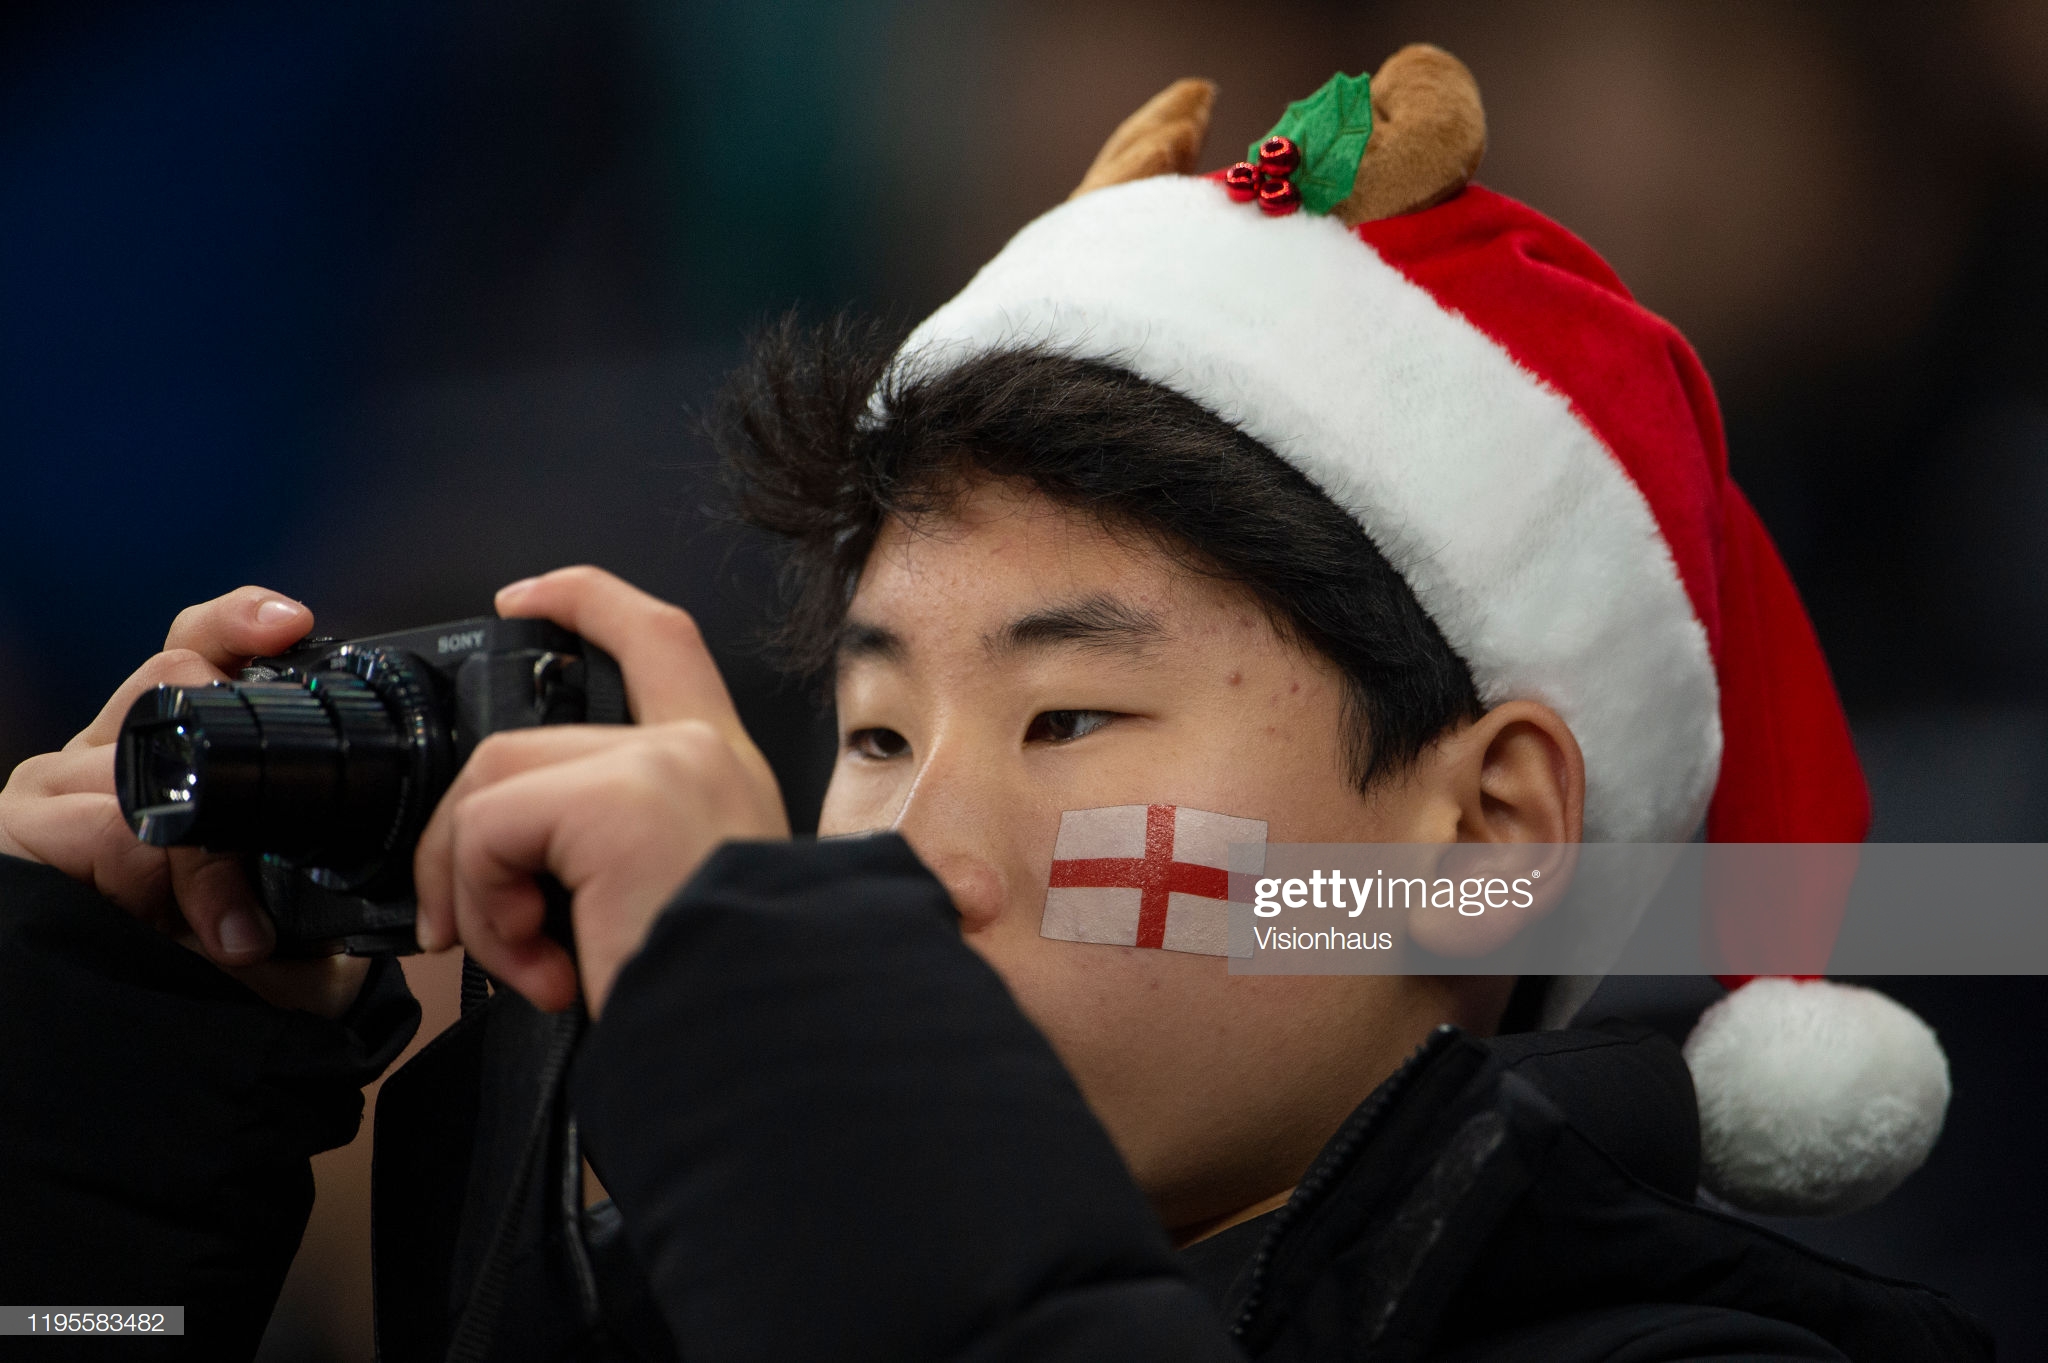 gettyimages-1195583482-2048x2048.jpg